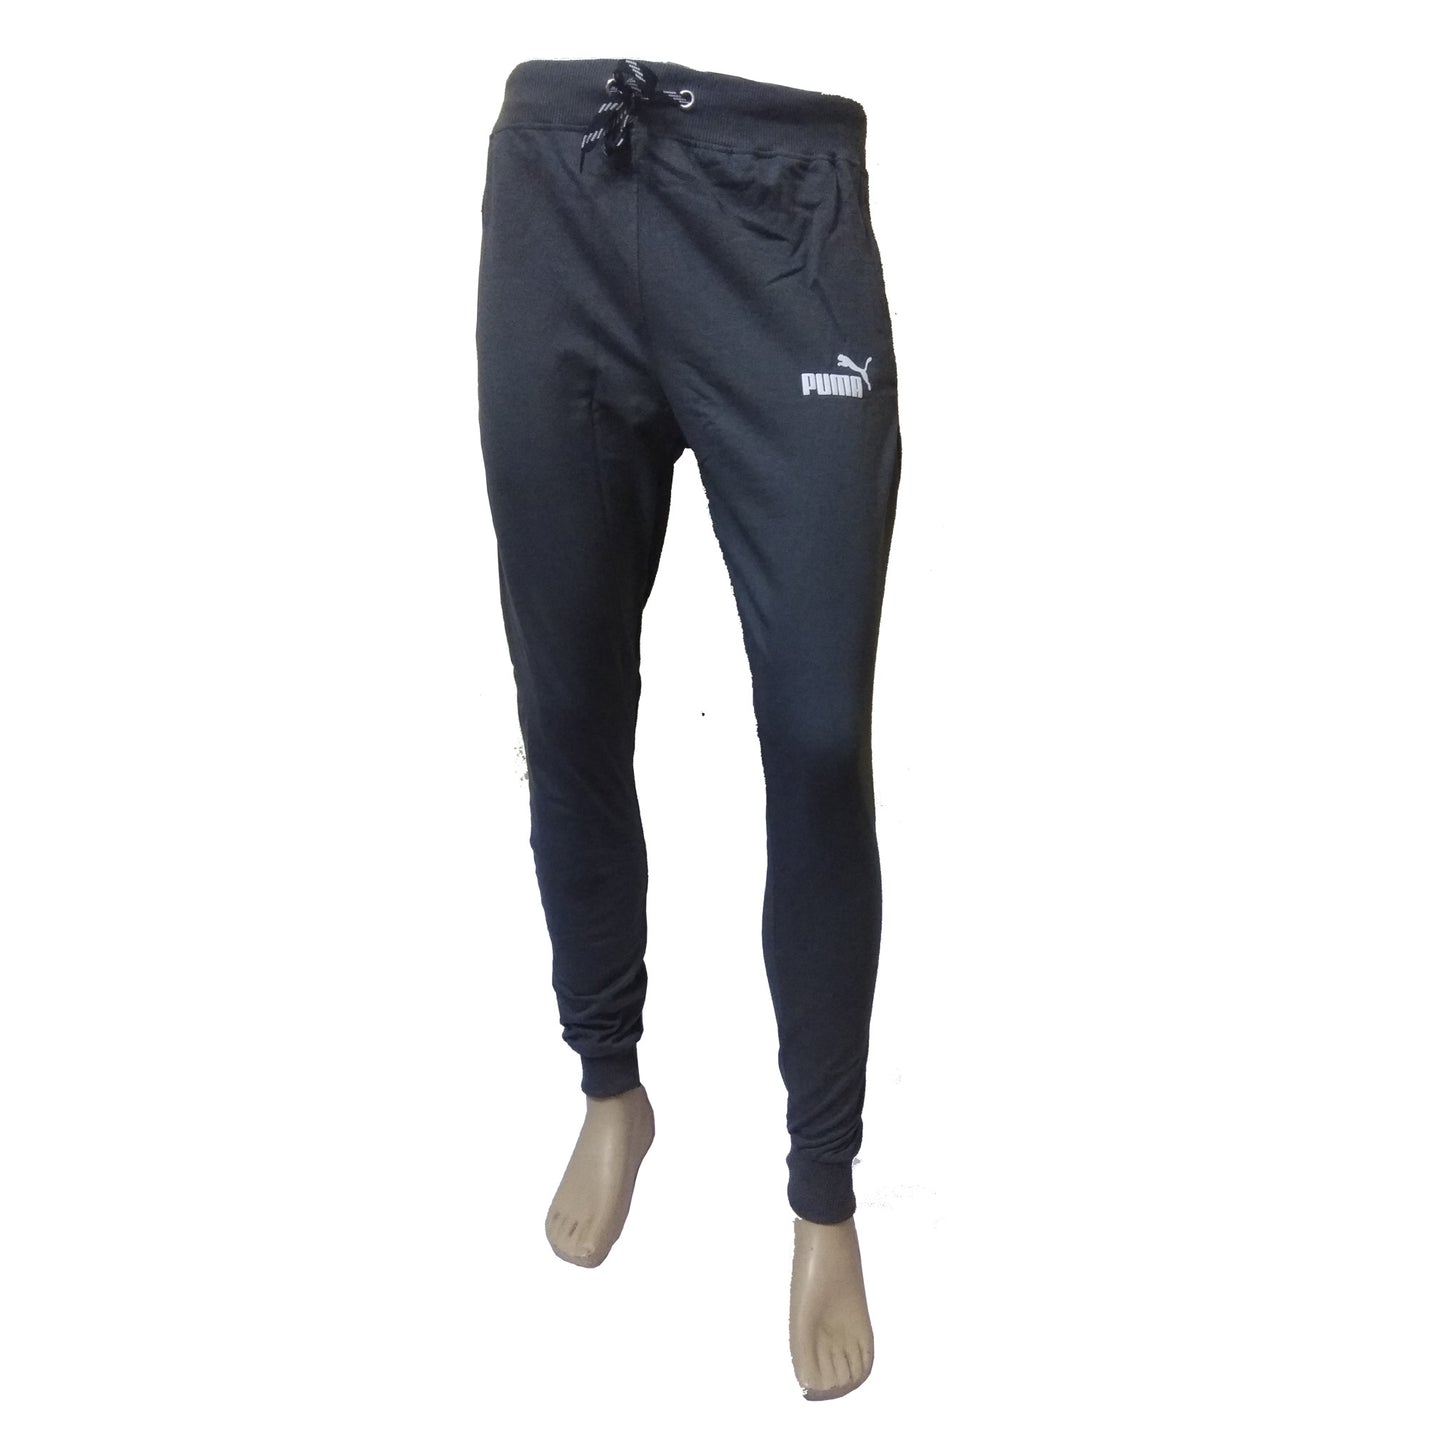 Branded Night Pant/Track Suit Jogger Model for men L to 4XL size 5 Colours